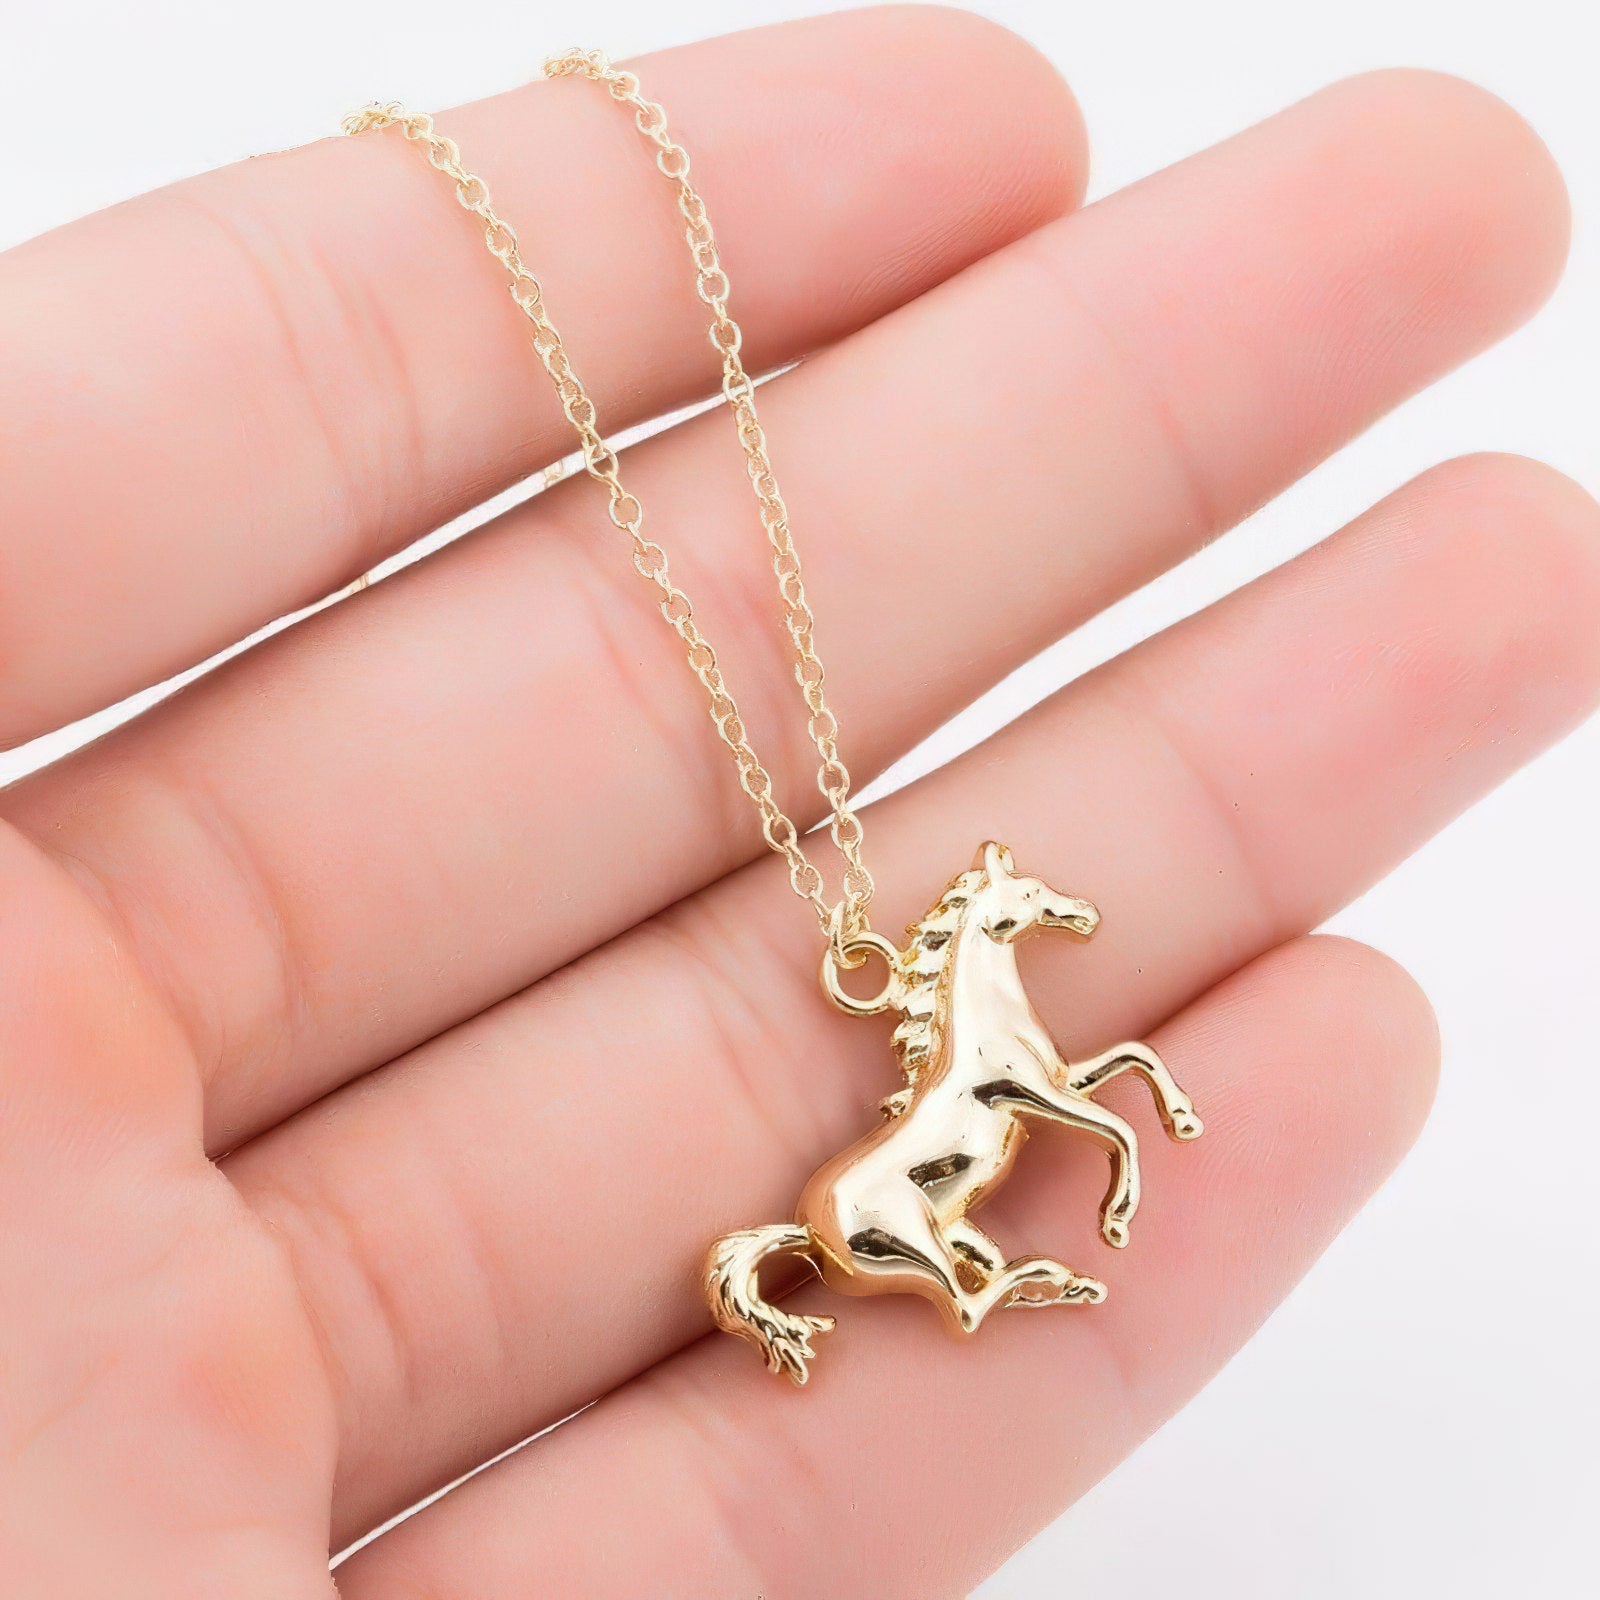 Metal racehorse necklaces for women